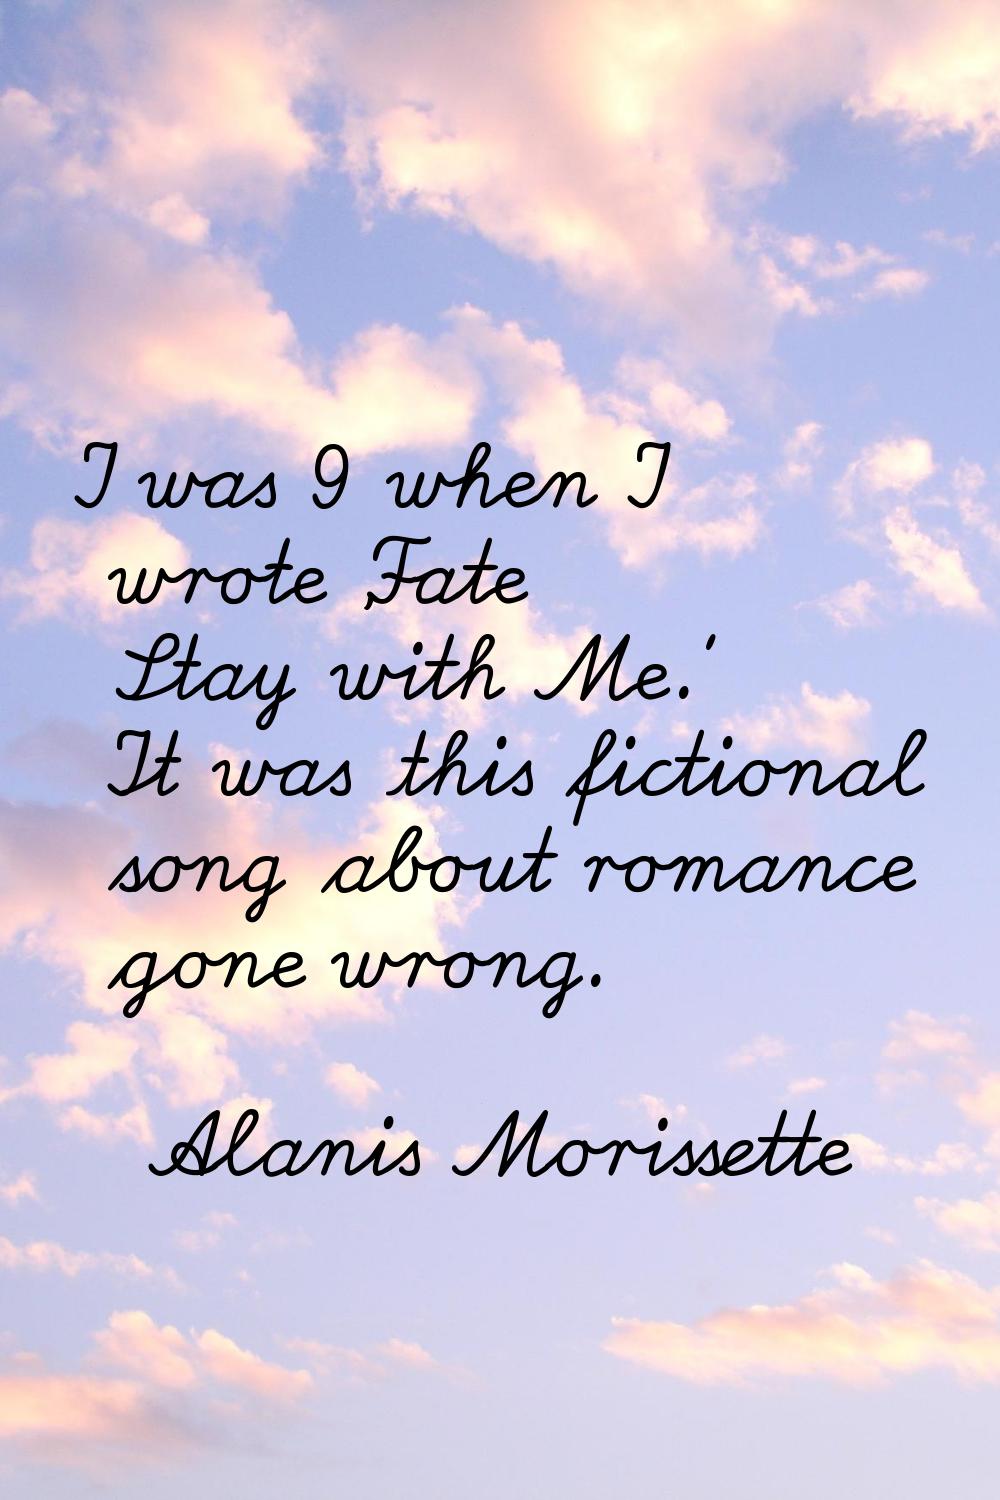 I was 9 when I wrote 'Fate Stay with Me.' It was this fictional song about romance gone wrong.